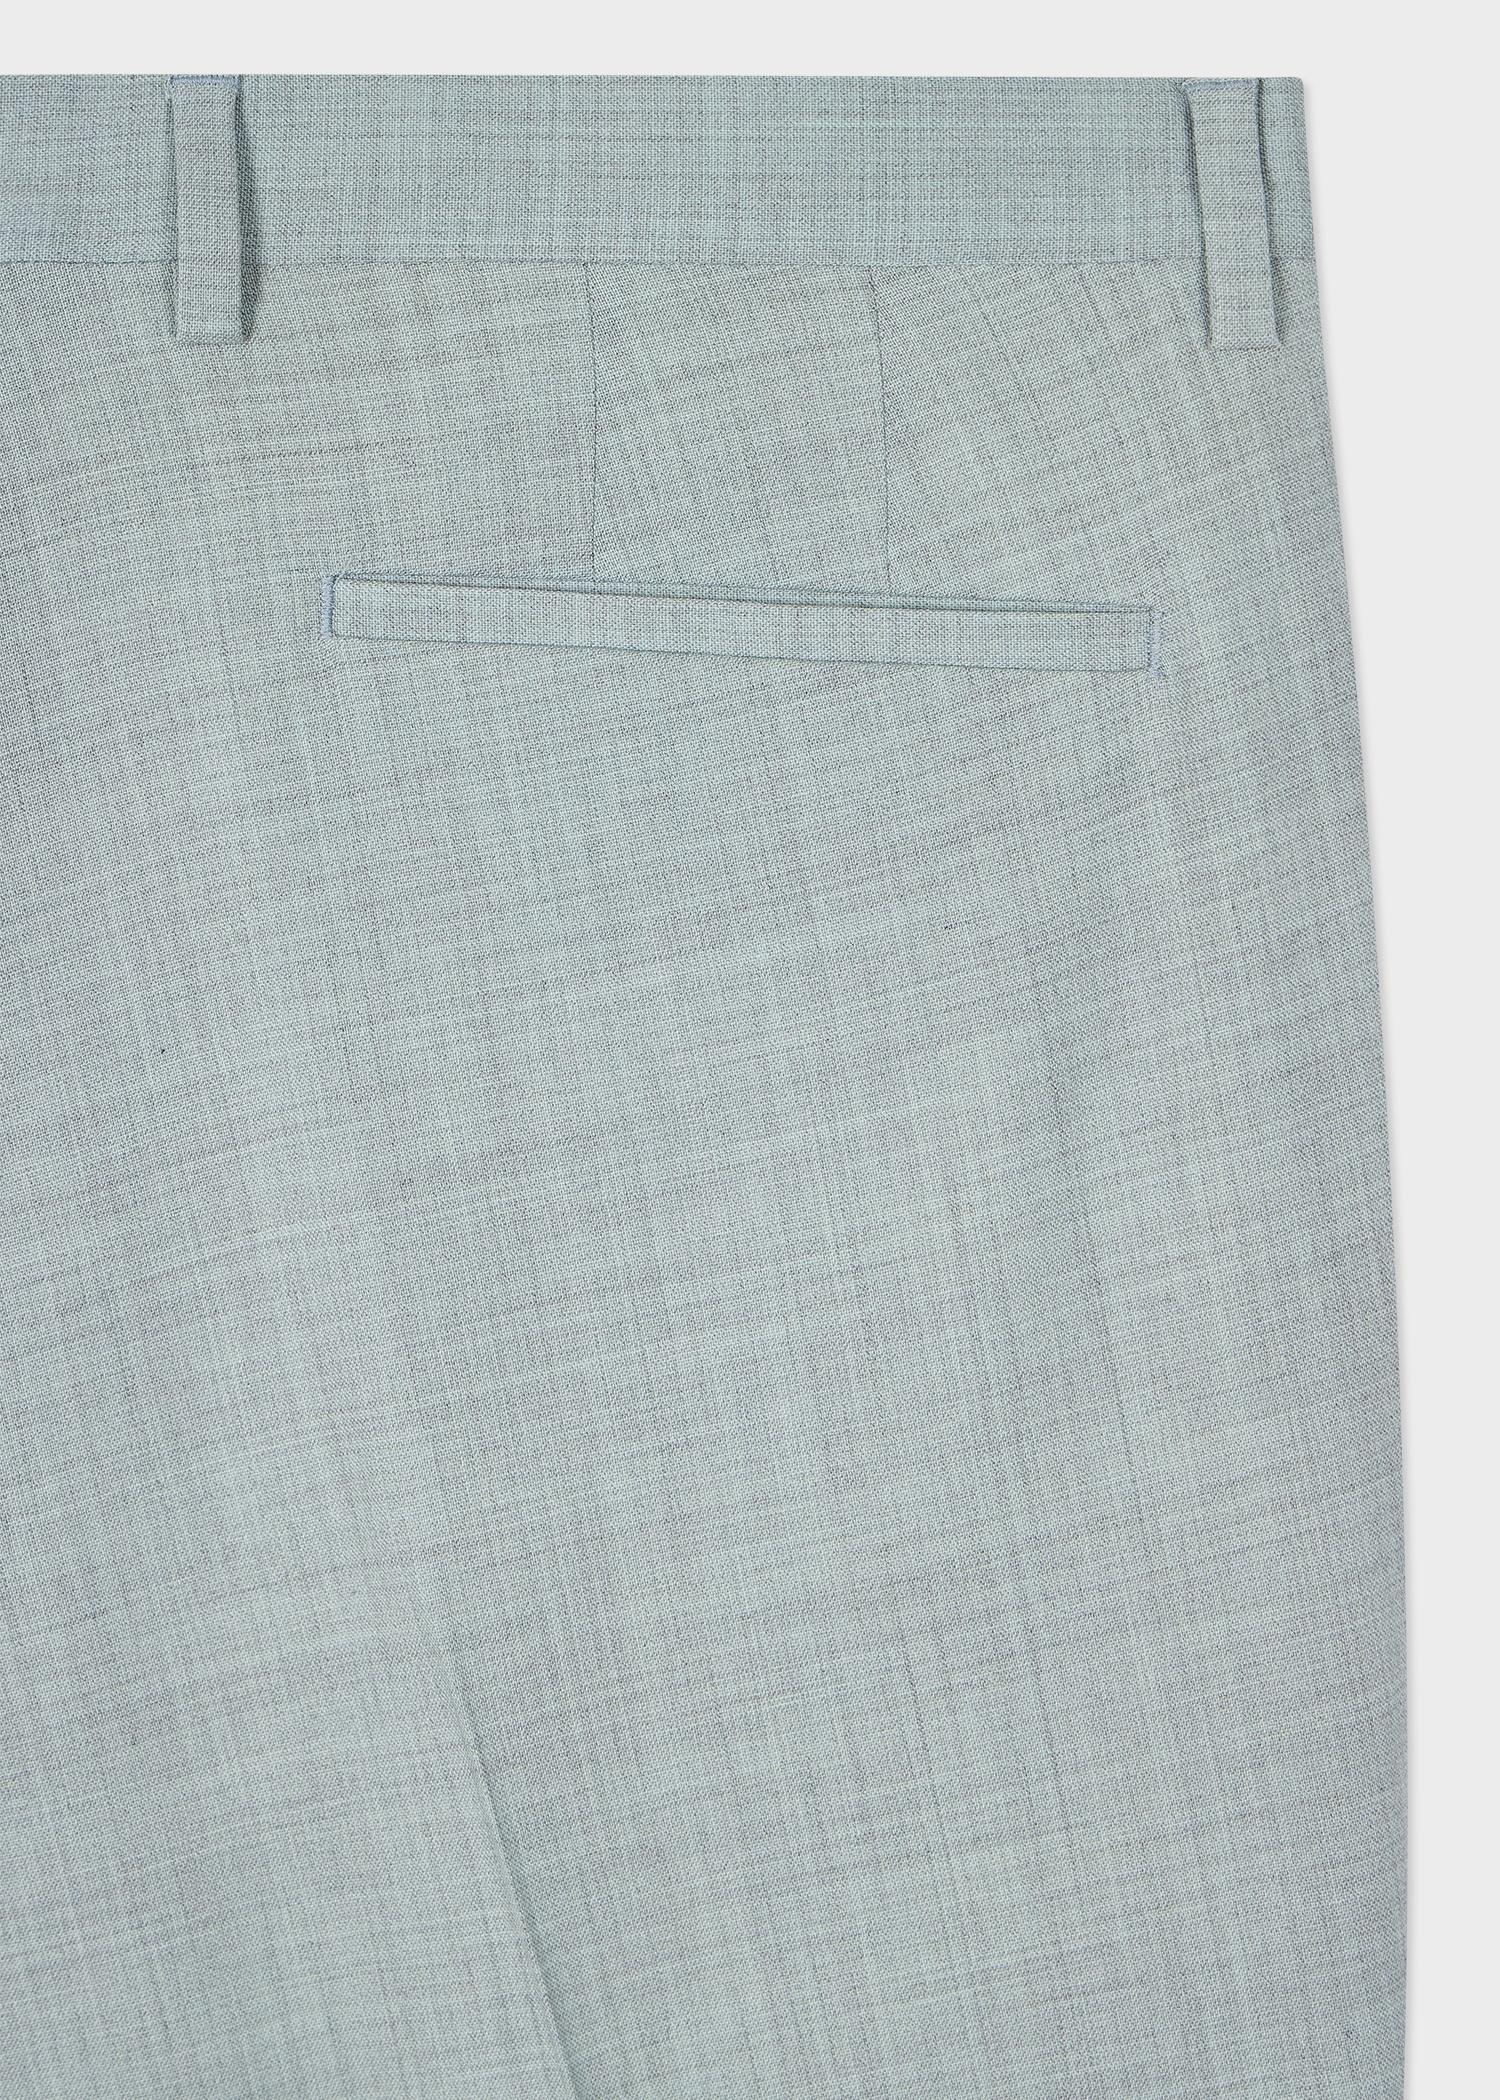 The Kensington - Light Blue Marl Overdyed Stretch-Wool Suit - 5